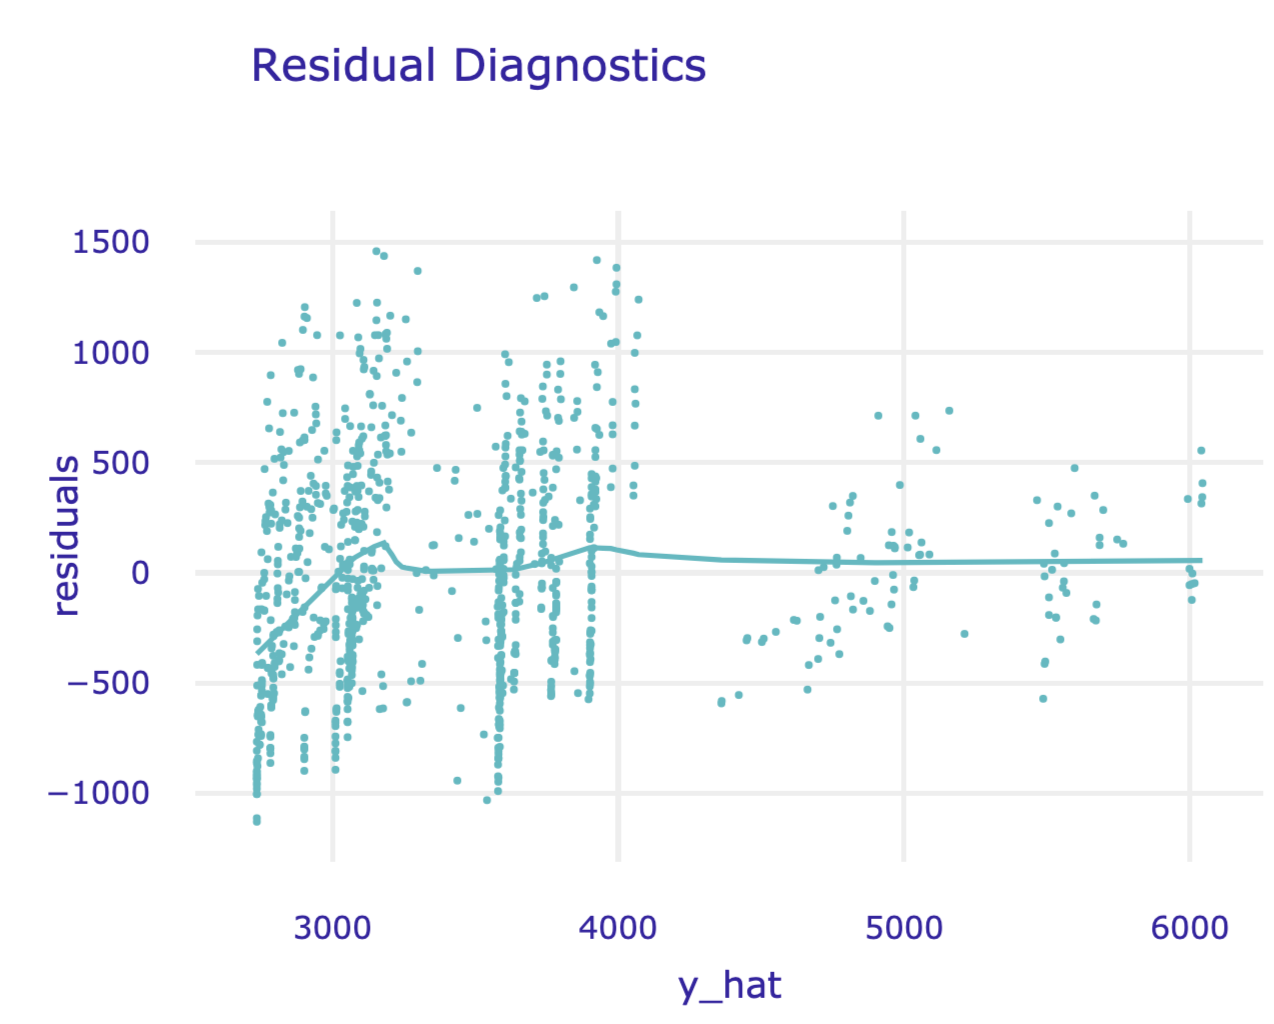 Residuals versus predicted values for the random forest model for the Apartments data.